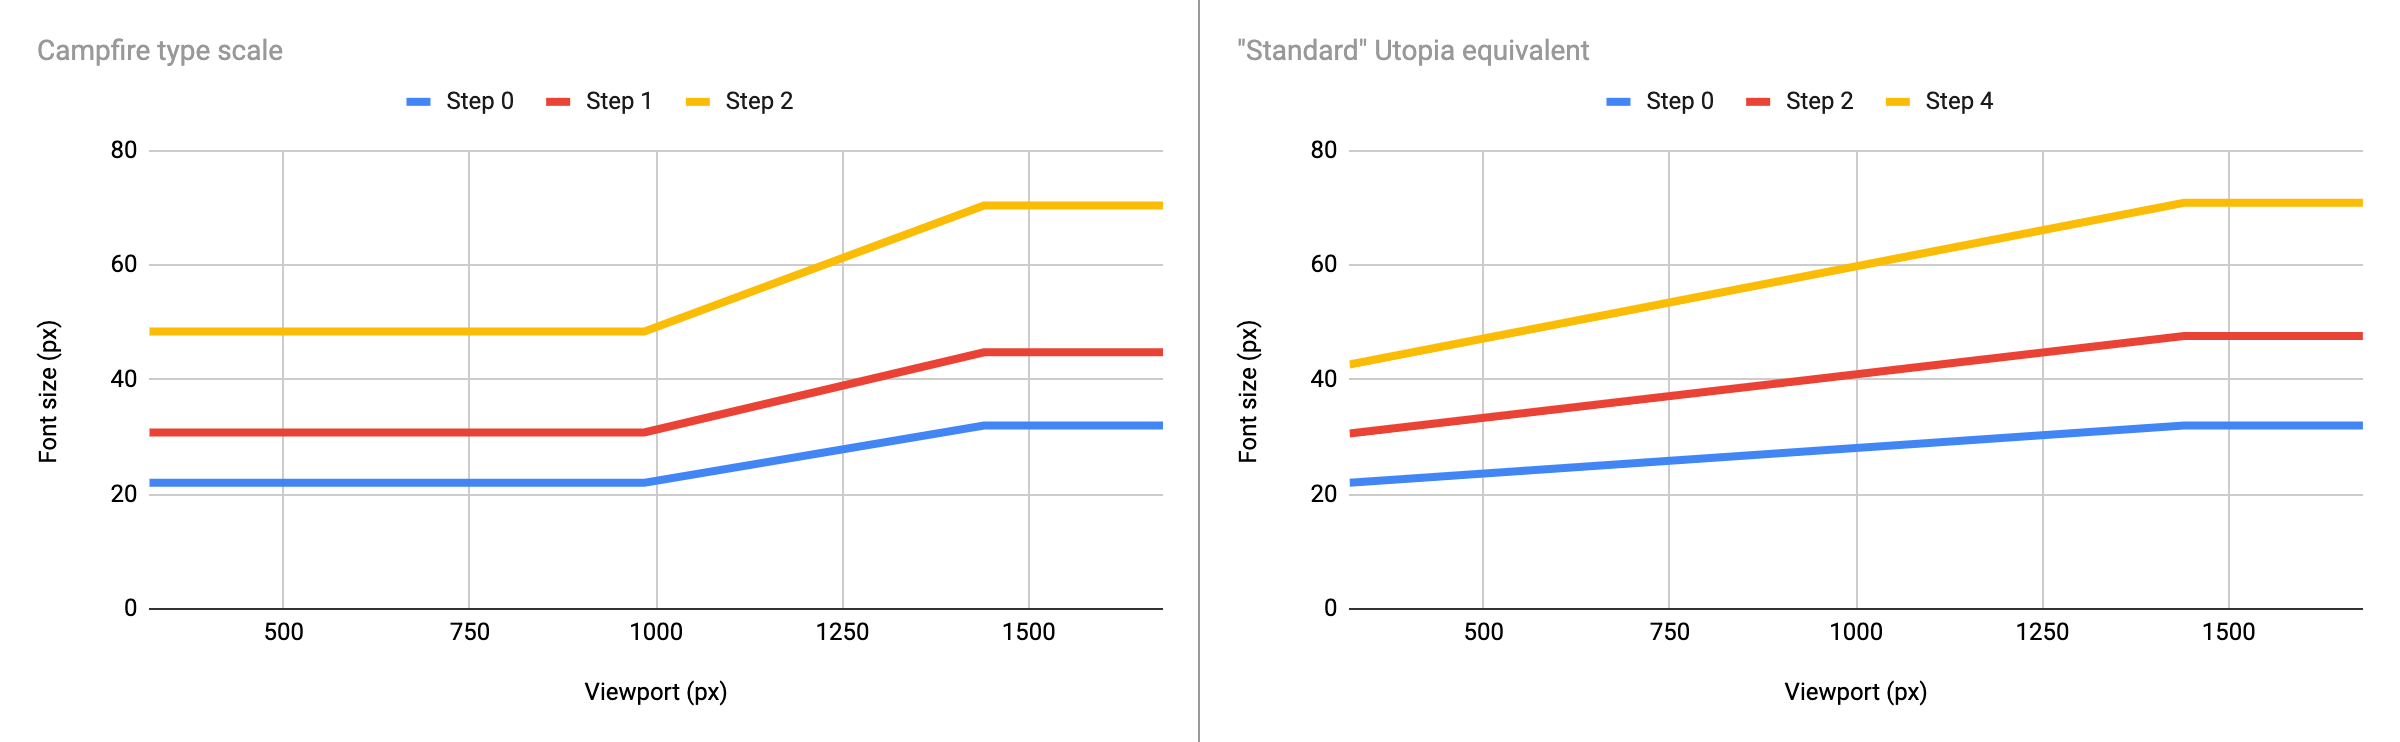 Two approaches to fluid type compared in charts. The left chart shows Campfire’s approach, with a long static crawl towards 980px before ramping up sharply by 1440px. All type is based off the body size, so scales consistently to 1440px where it tails off. On the right, a more traditional Utopian approach, showing steps 0, 2 and 4. Type starts scaling from 320 through till 1440px, then tails off.